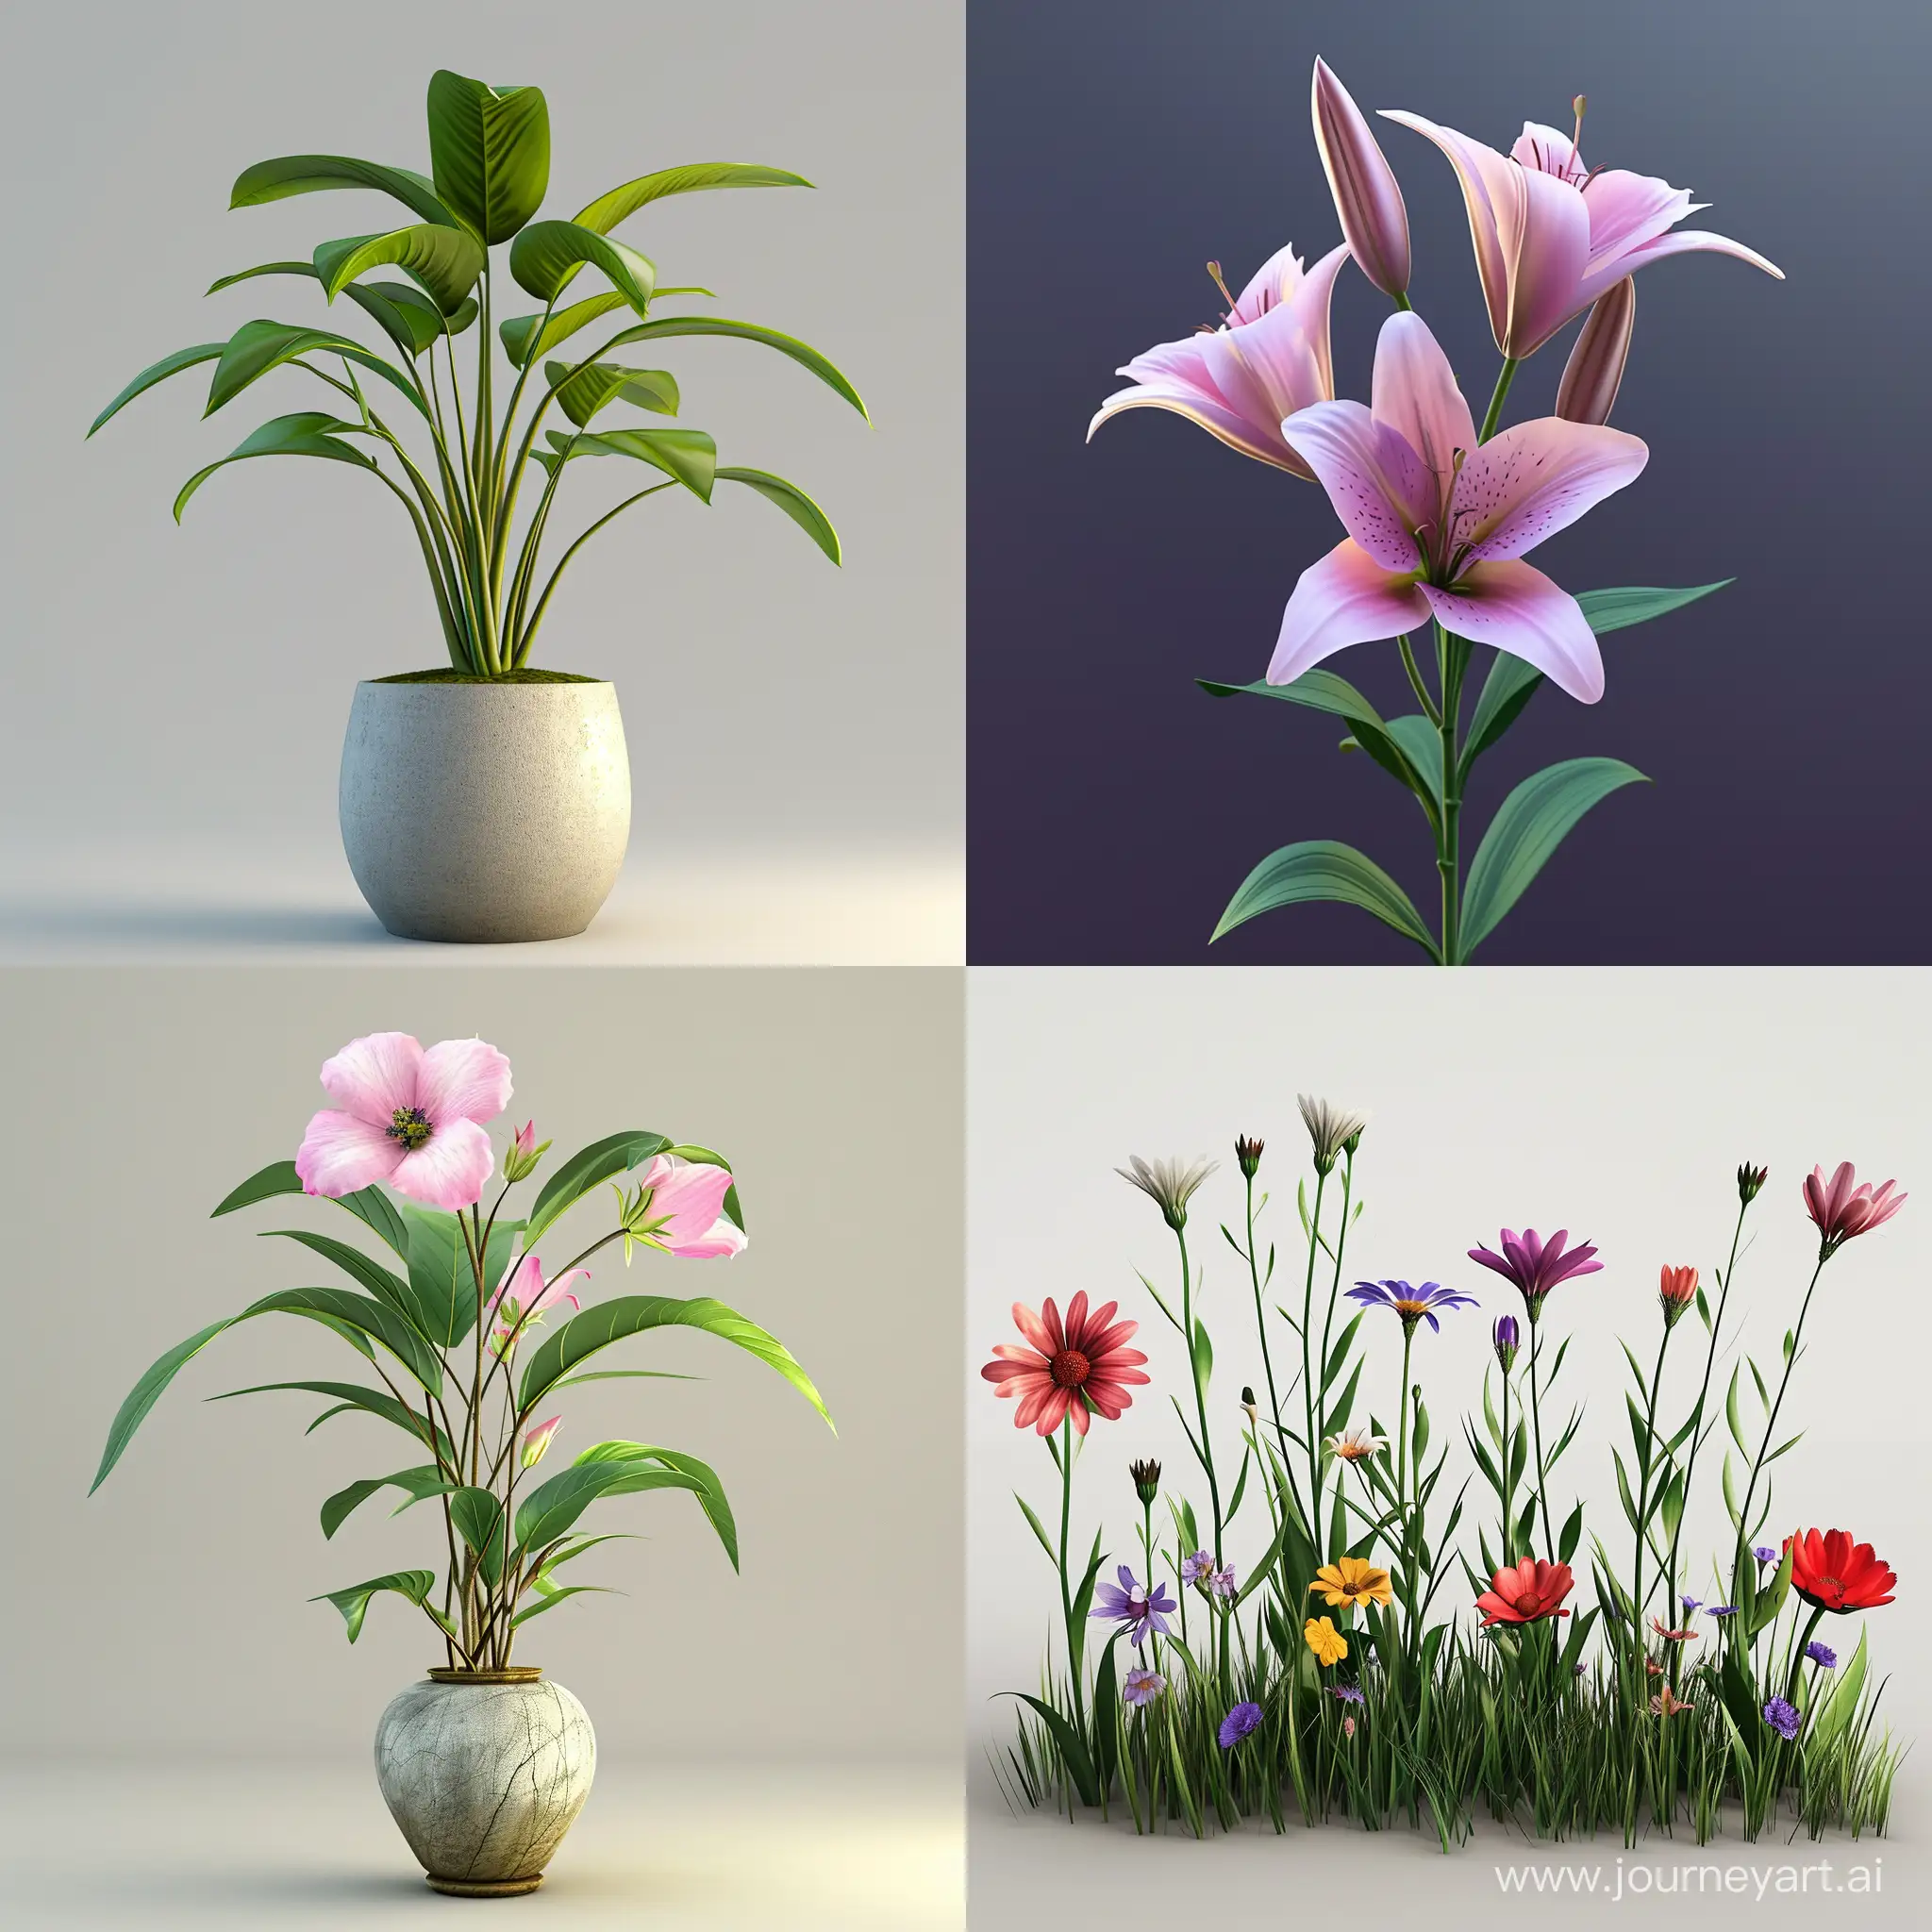 Realistic-3D-Flower-Plant-Model-with-Texturing-Animation